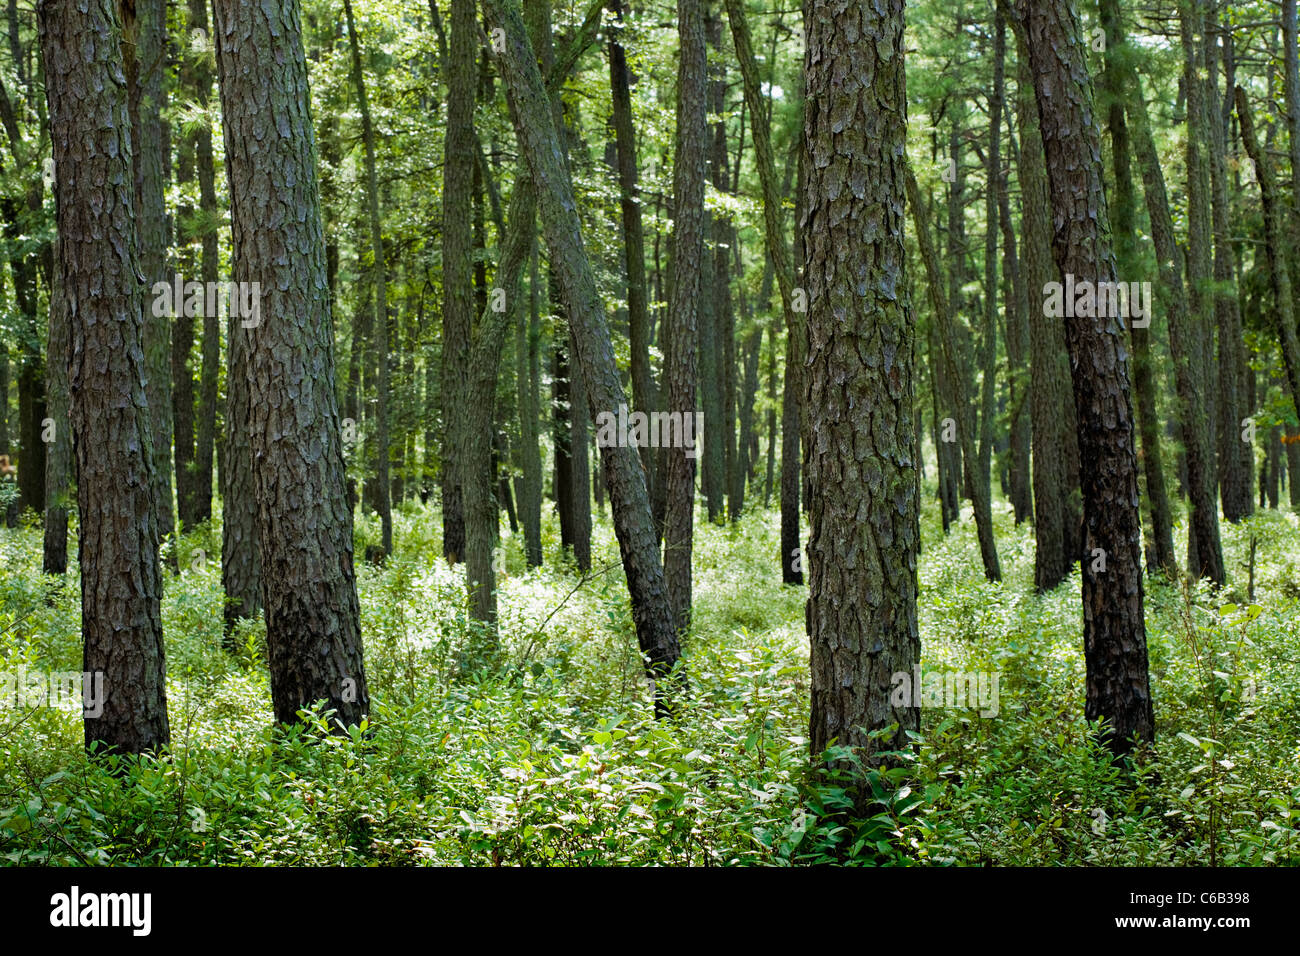 The Pine Barrens of New Jersey have a lot of... pines! Stock Photo